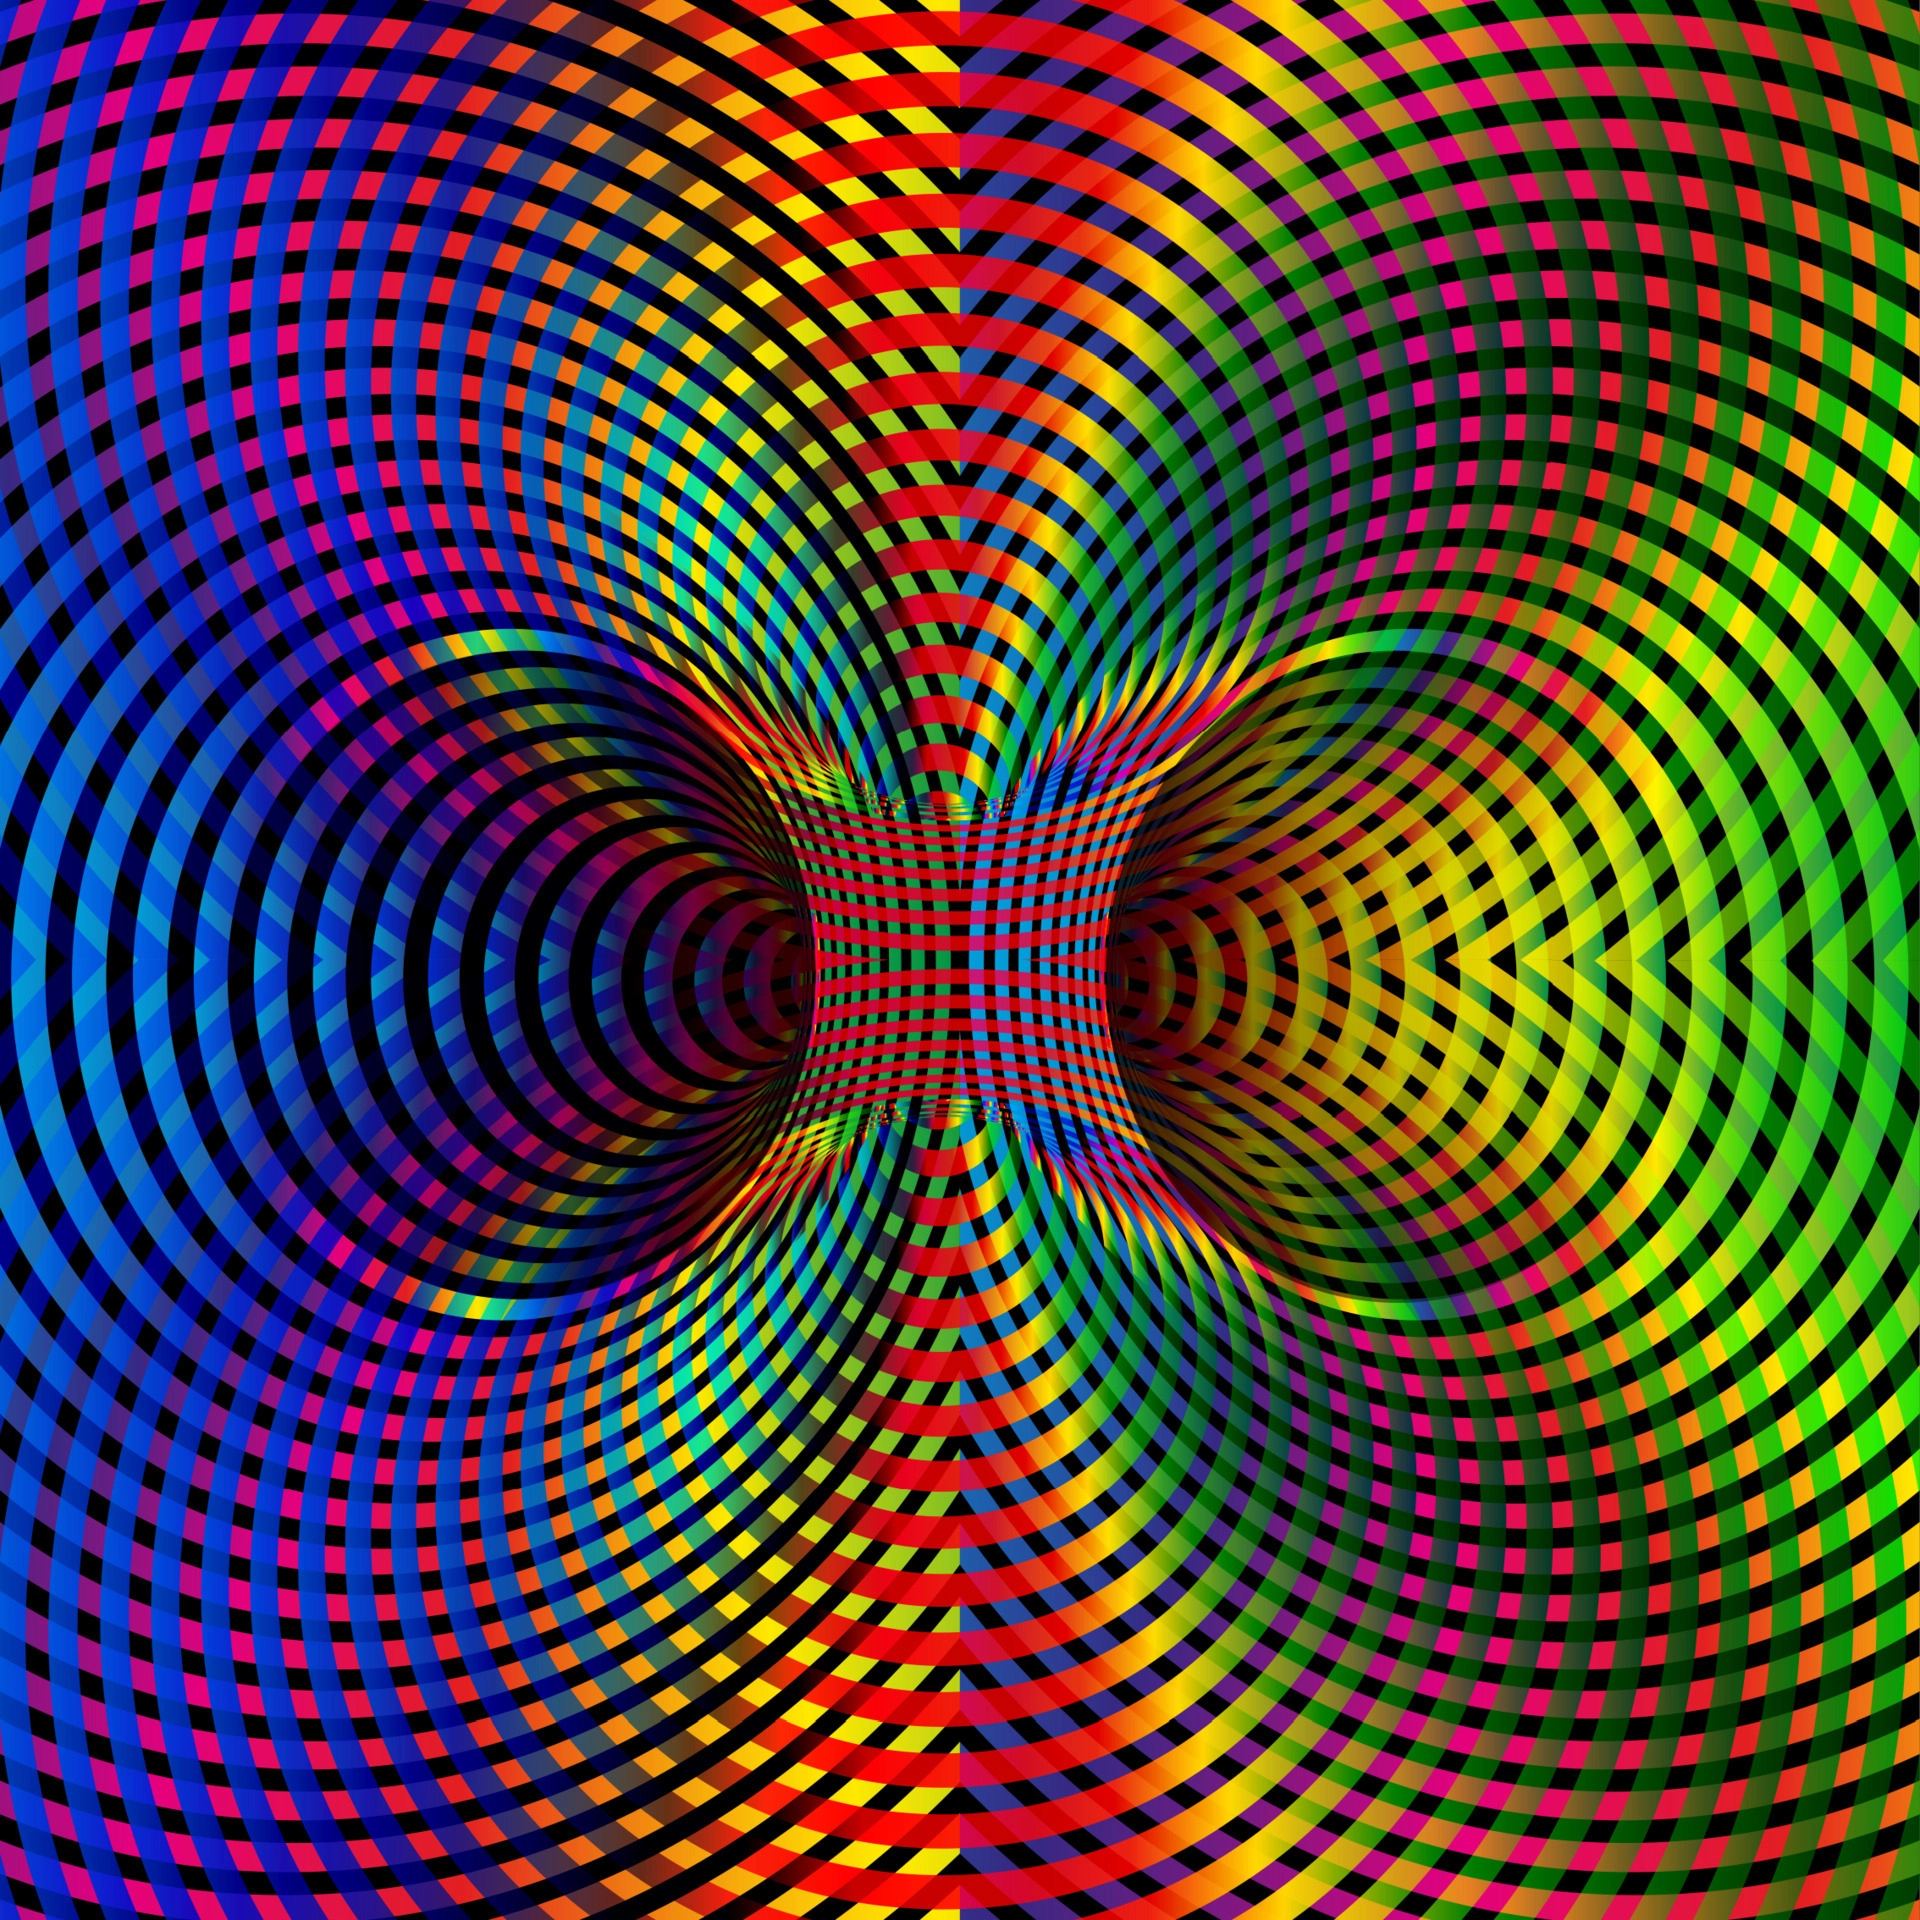 1920x1920 Wormhole Optical Illusion iridescent, Double Worm Hole colorful spectrum gradient, Abstract Hypnotic psychedelic tunnel space. Multicolors Twisted Vector Illusion 3D Optical Art background 4329617 Vector Art